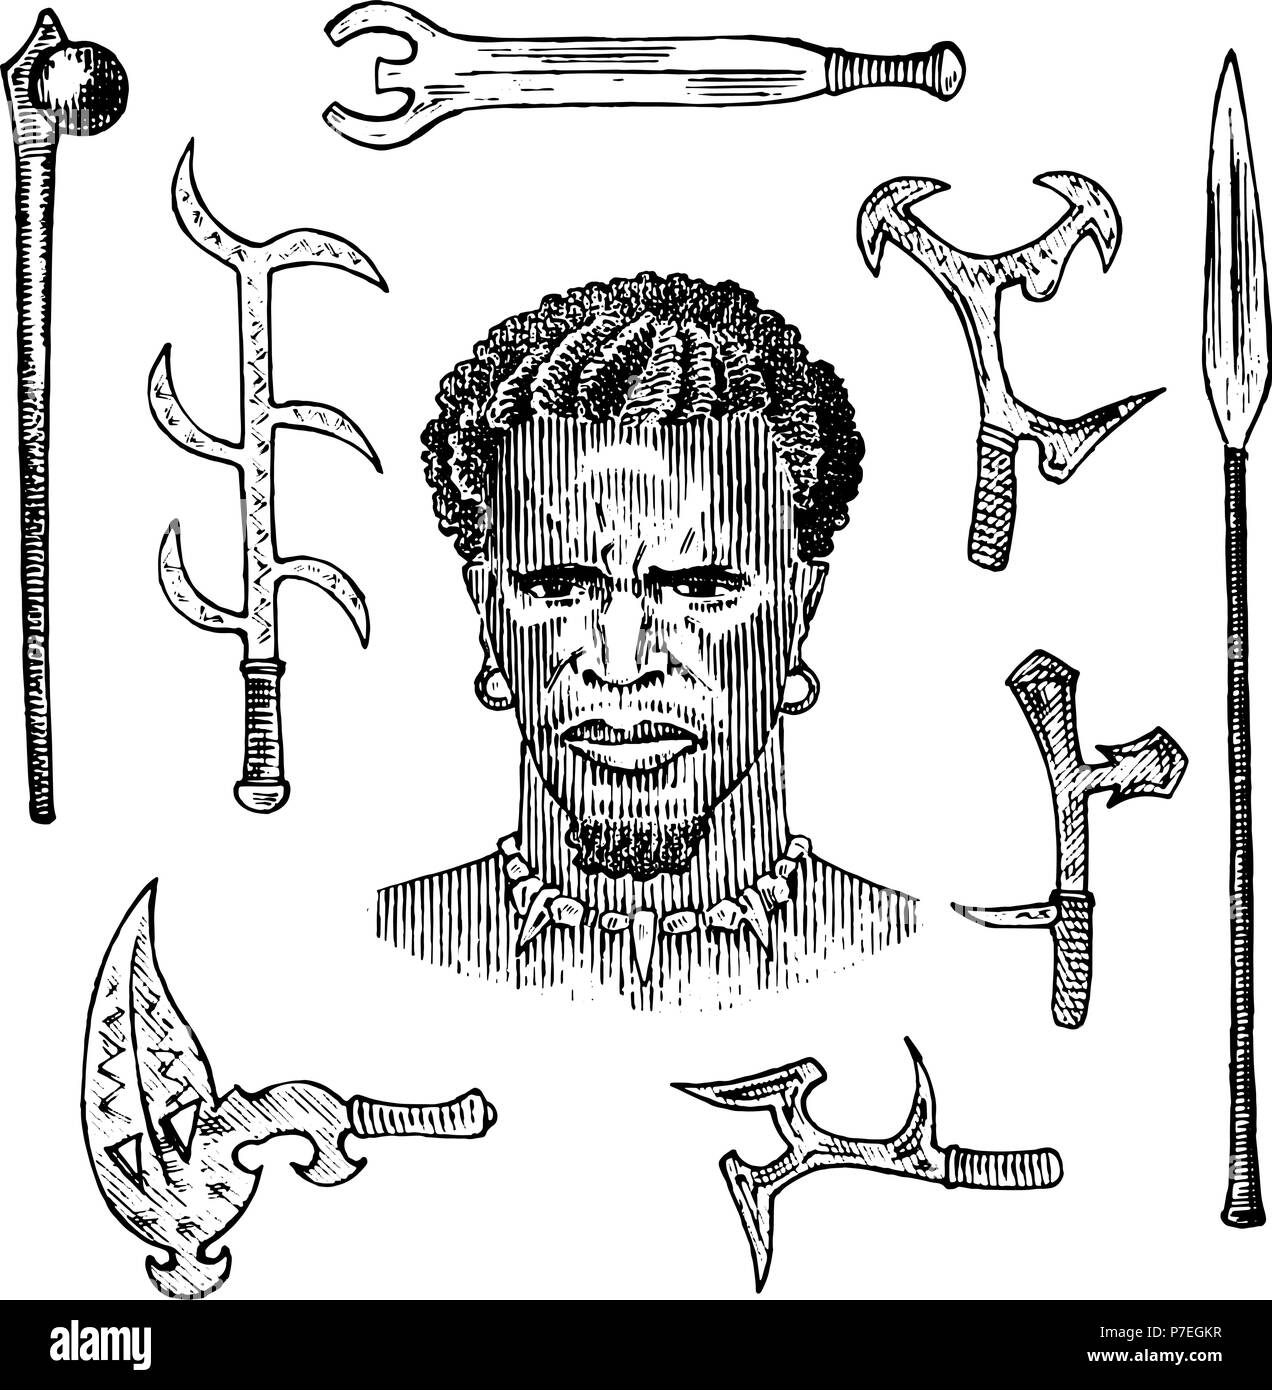 African tribe with spears and weapons, portrait of Aborigine in traditional costume. Australian Warlike black native man. Engraved hand drawn old monochrome Vintage sketch for label. Stock Vector